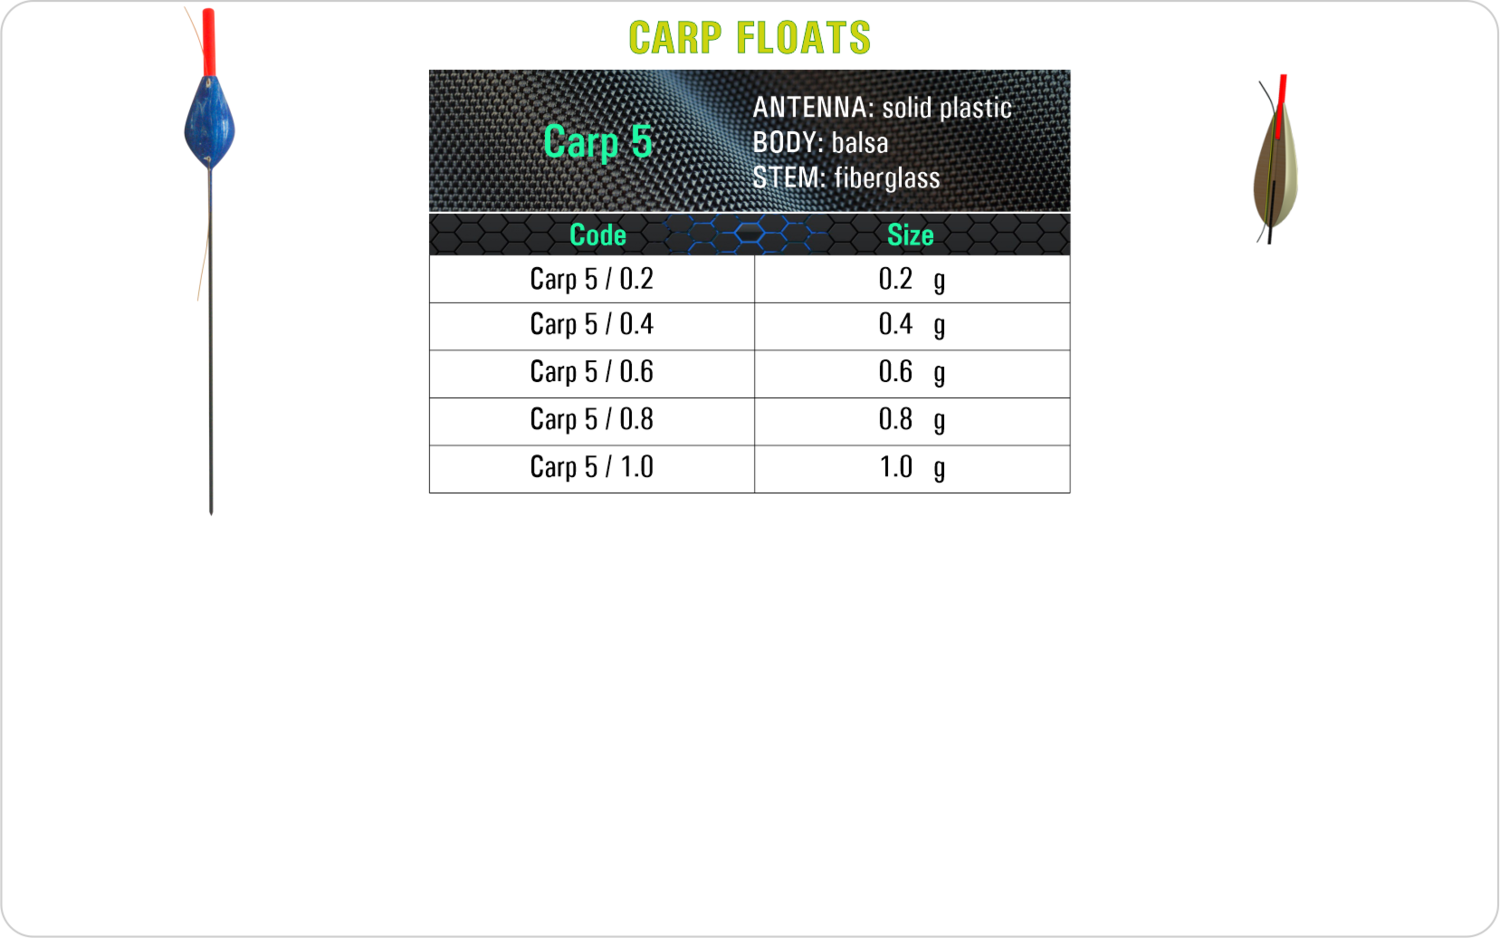 SF Carp 5 Carp float model and table containing an additional information about this float with different codes, sizes, types of the body, the stem and the antenna of the float.